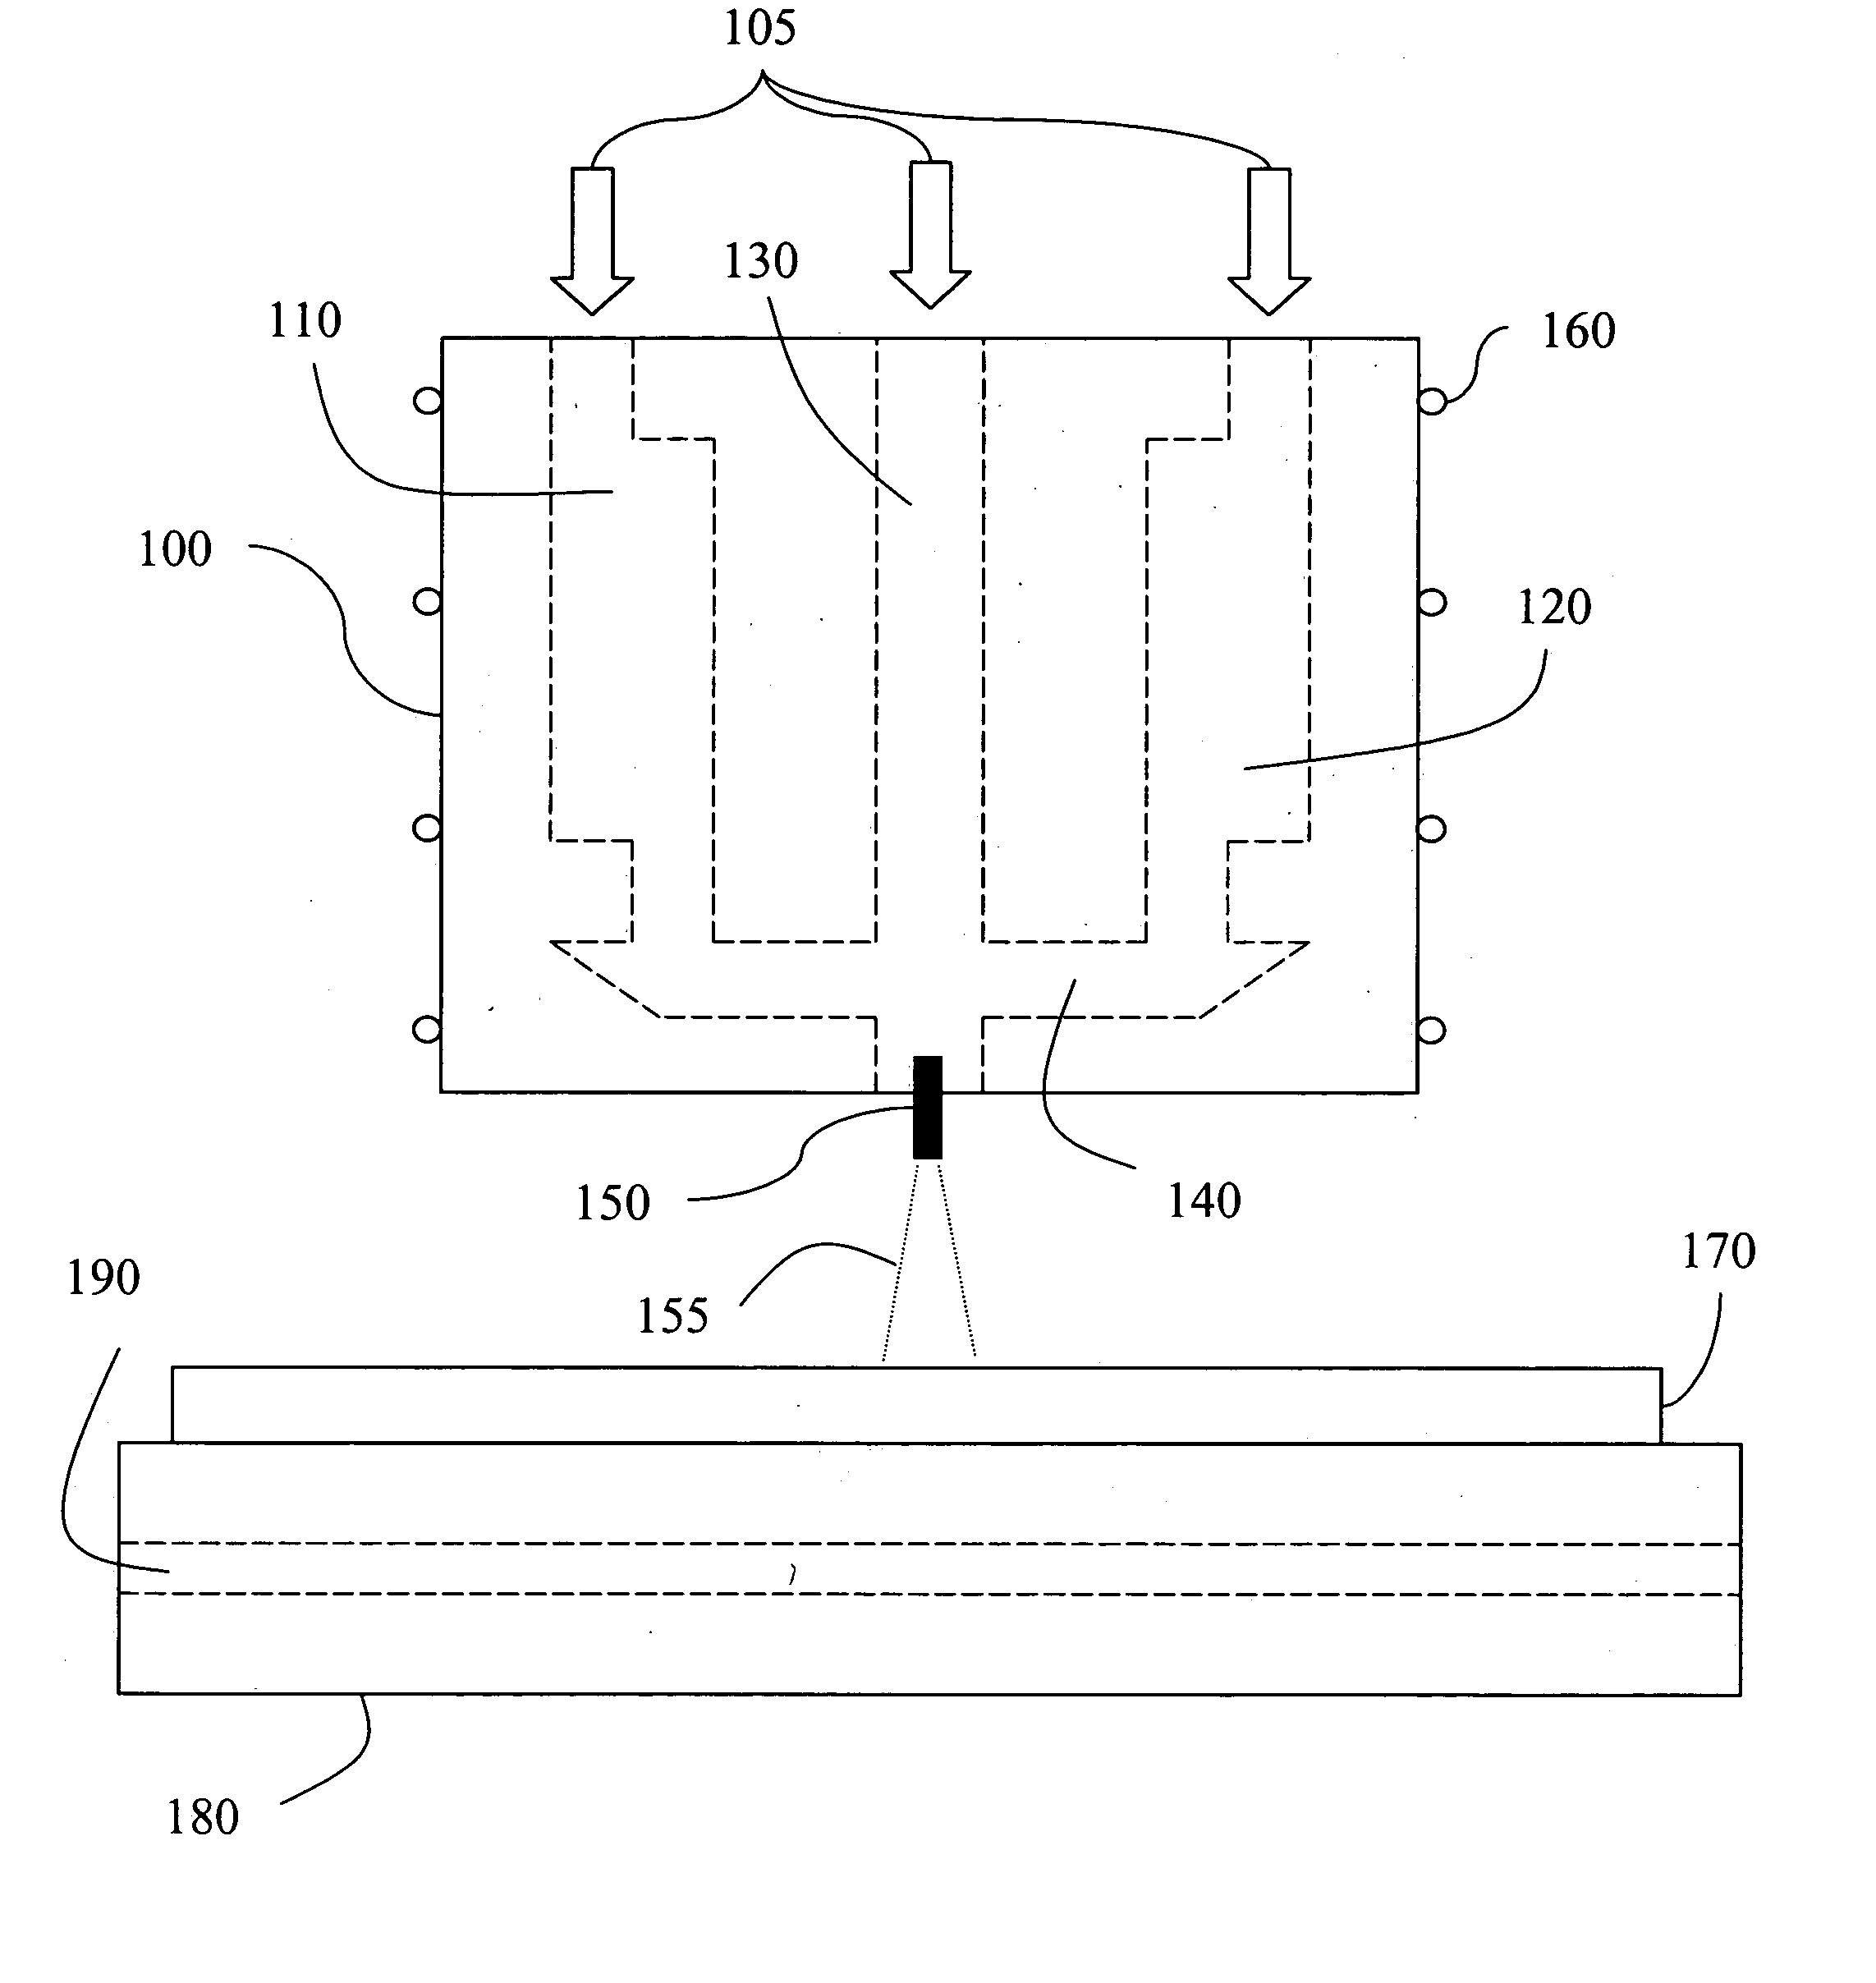 Method and apparatus for depositing material